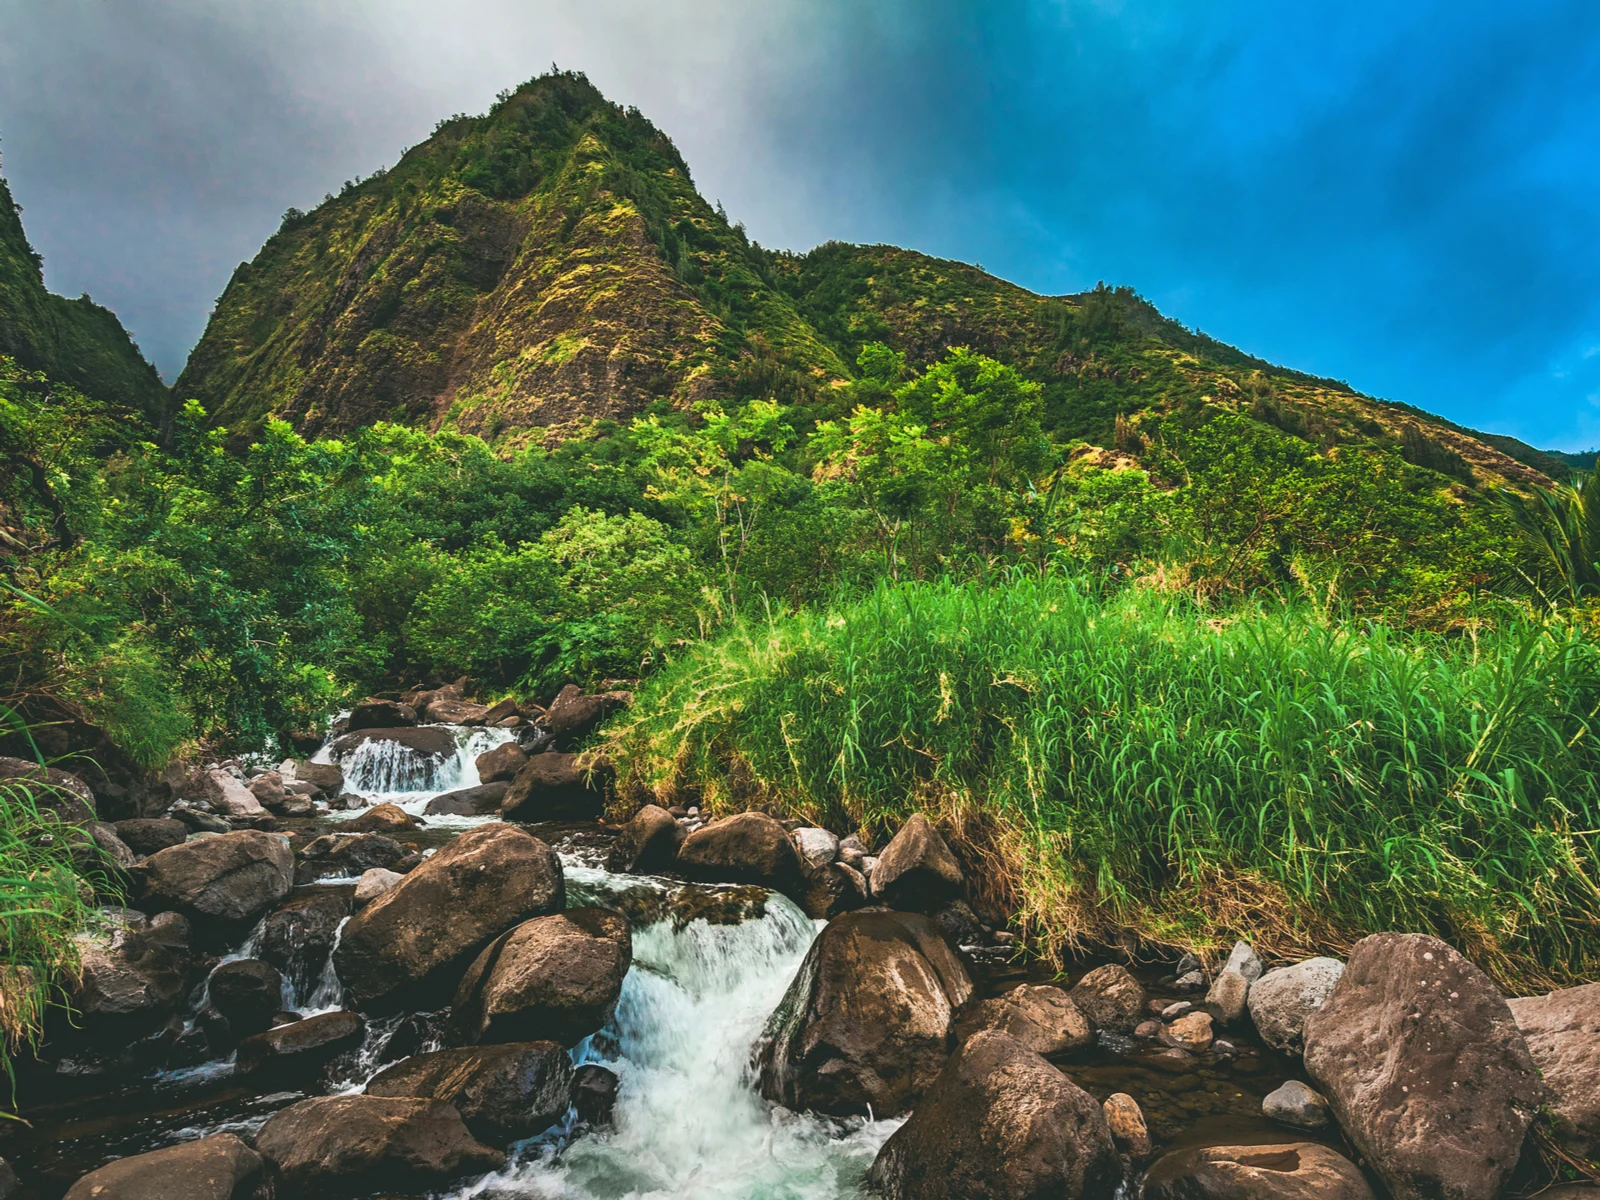 ‘Iao Valley State Park, one of the best hikes in Hawaii